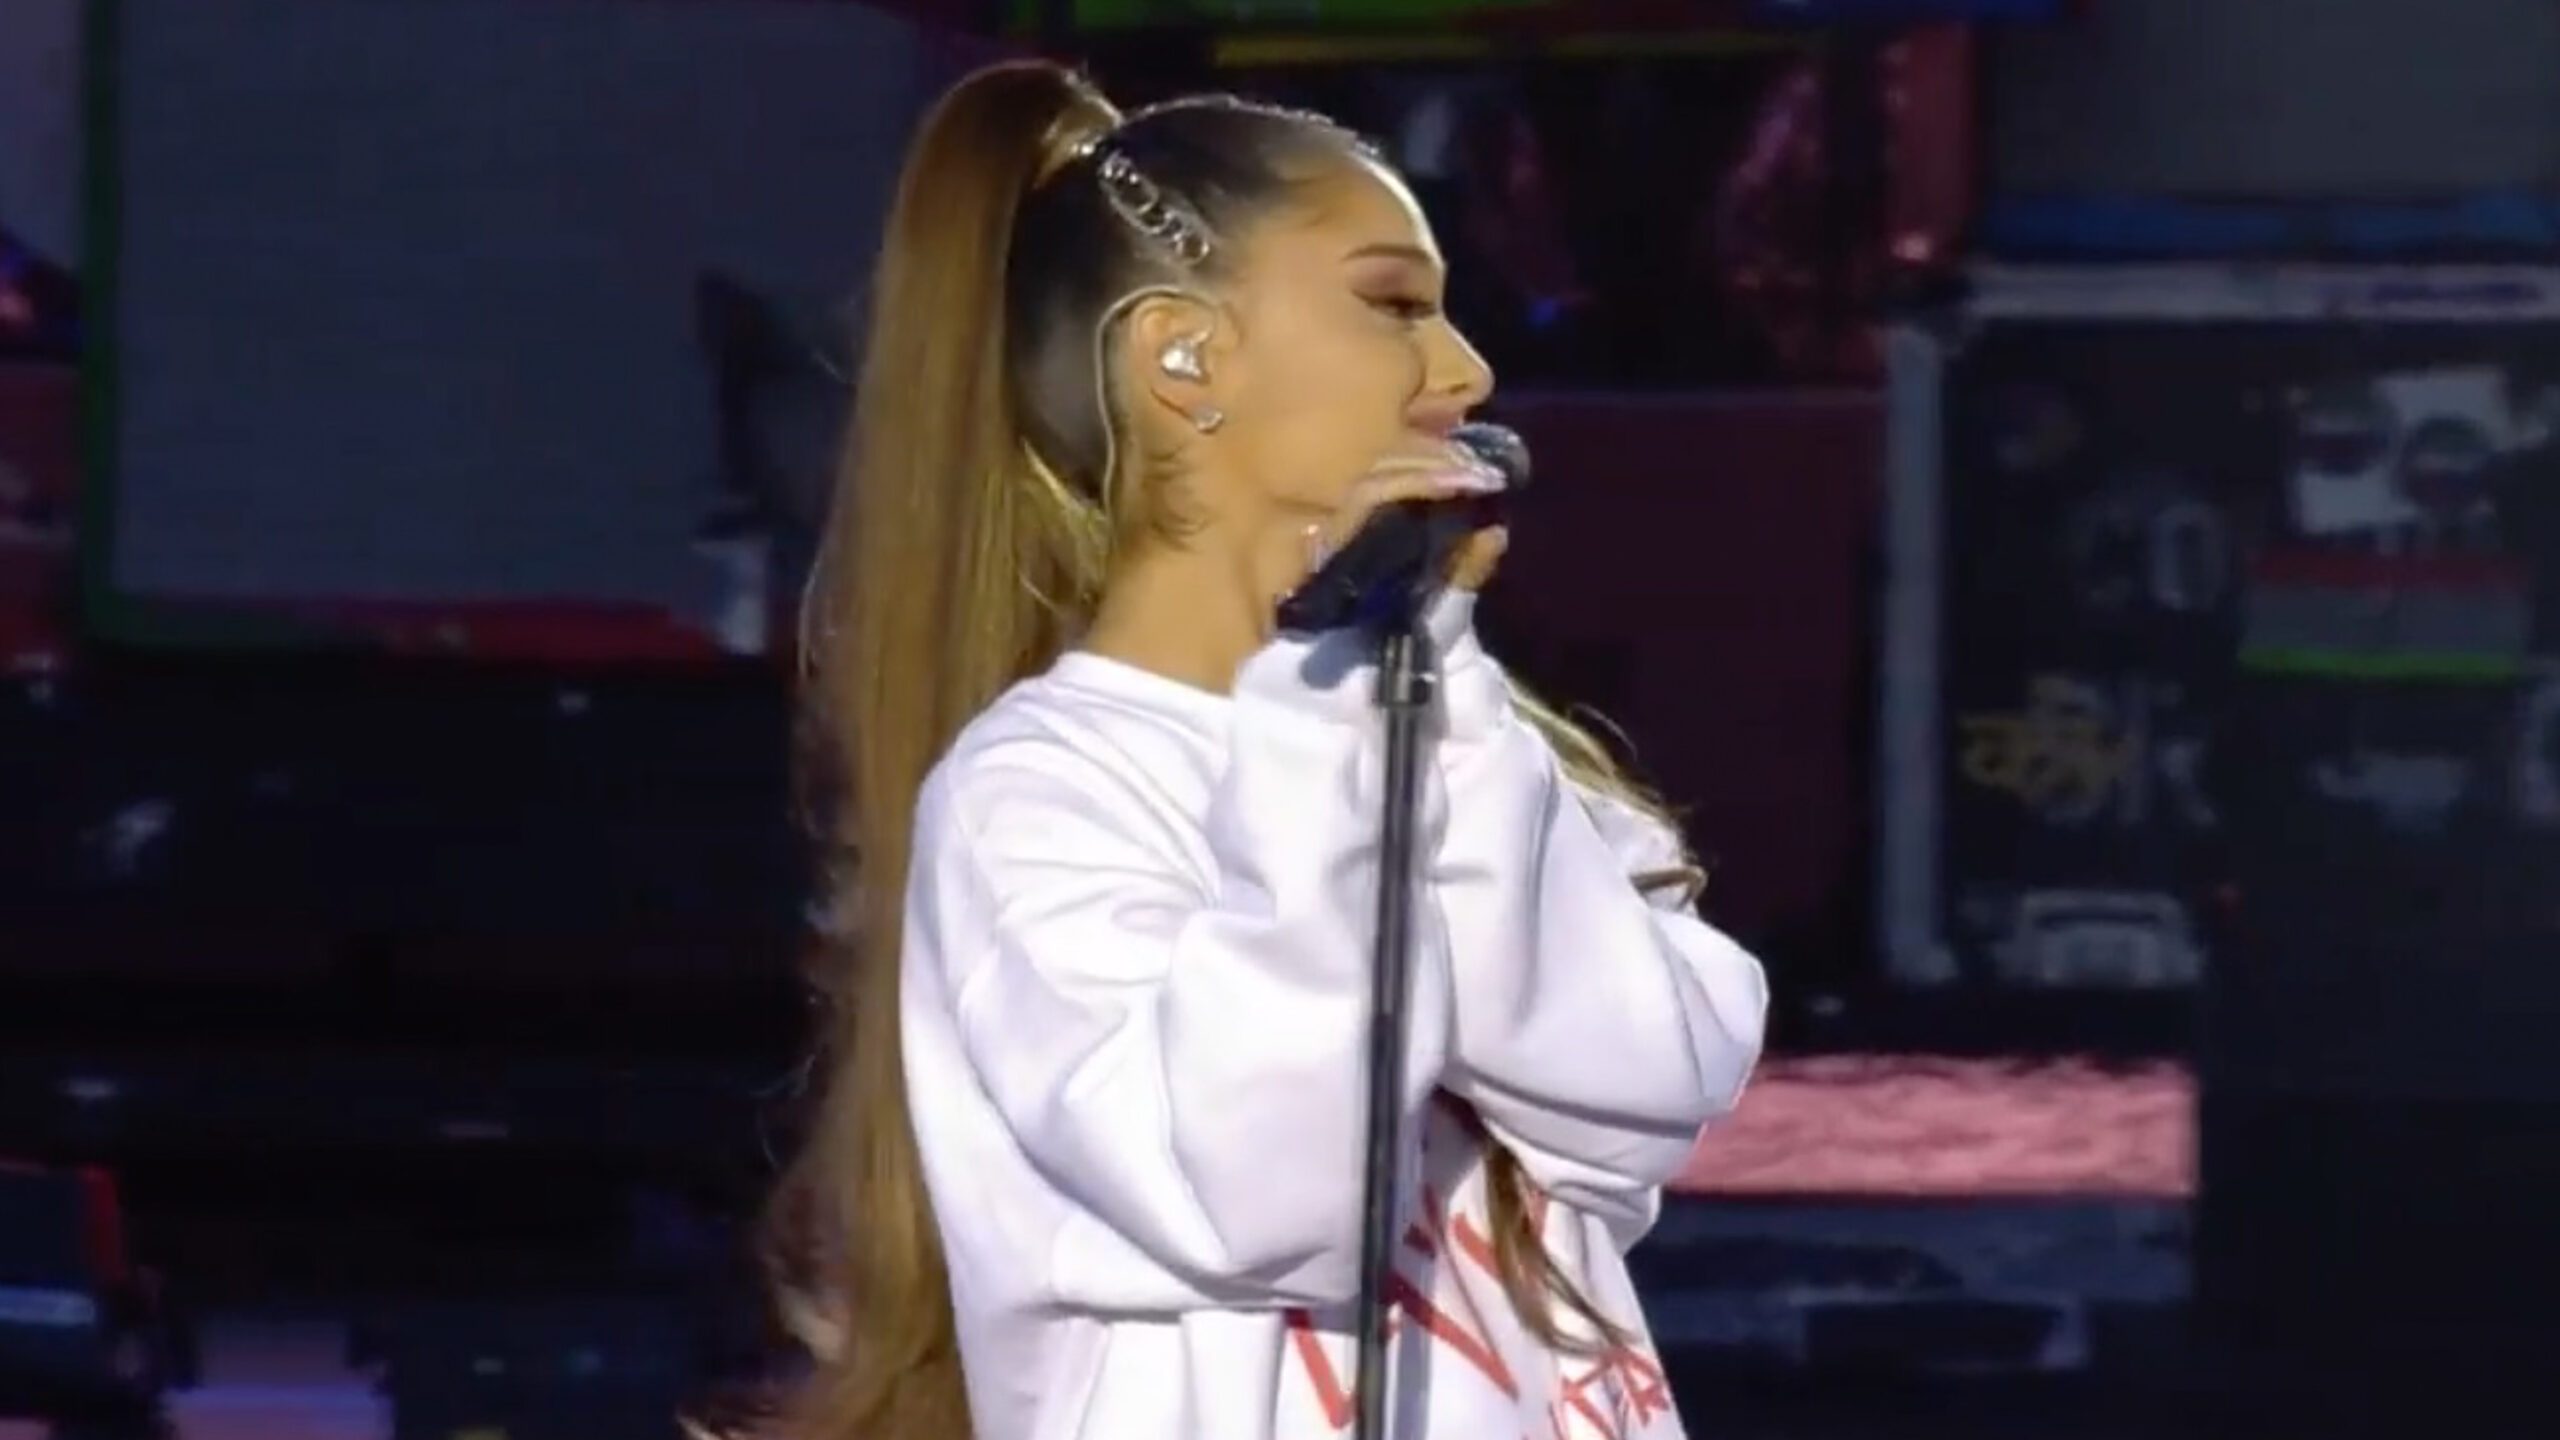 WATCH: Ariana Grande thanks the crowd at ‘One Love Manchester’